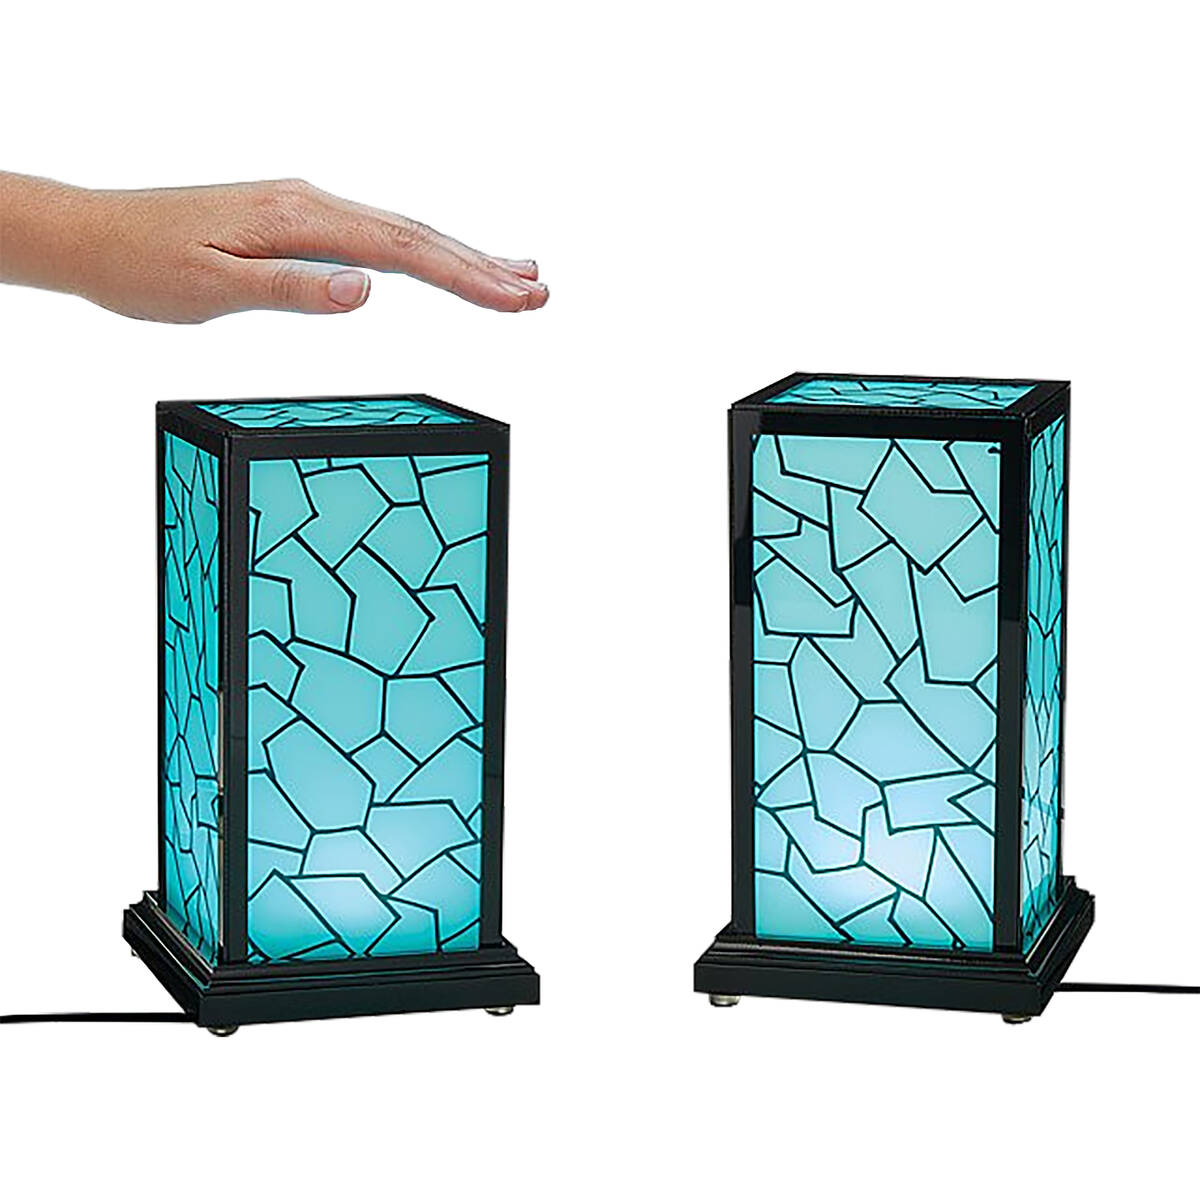 1. Long Distance Friendship Lamp A joint gift for family and close friends: Touch your lamp an ...